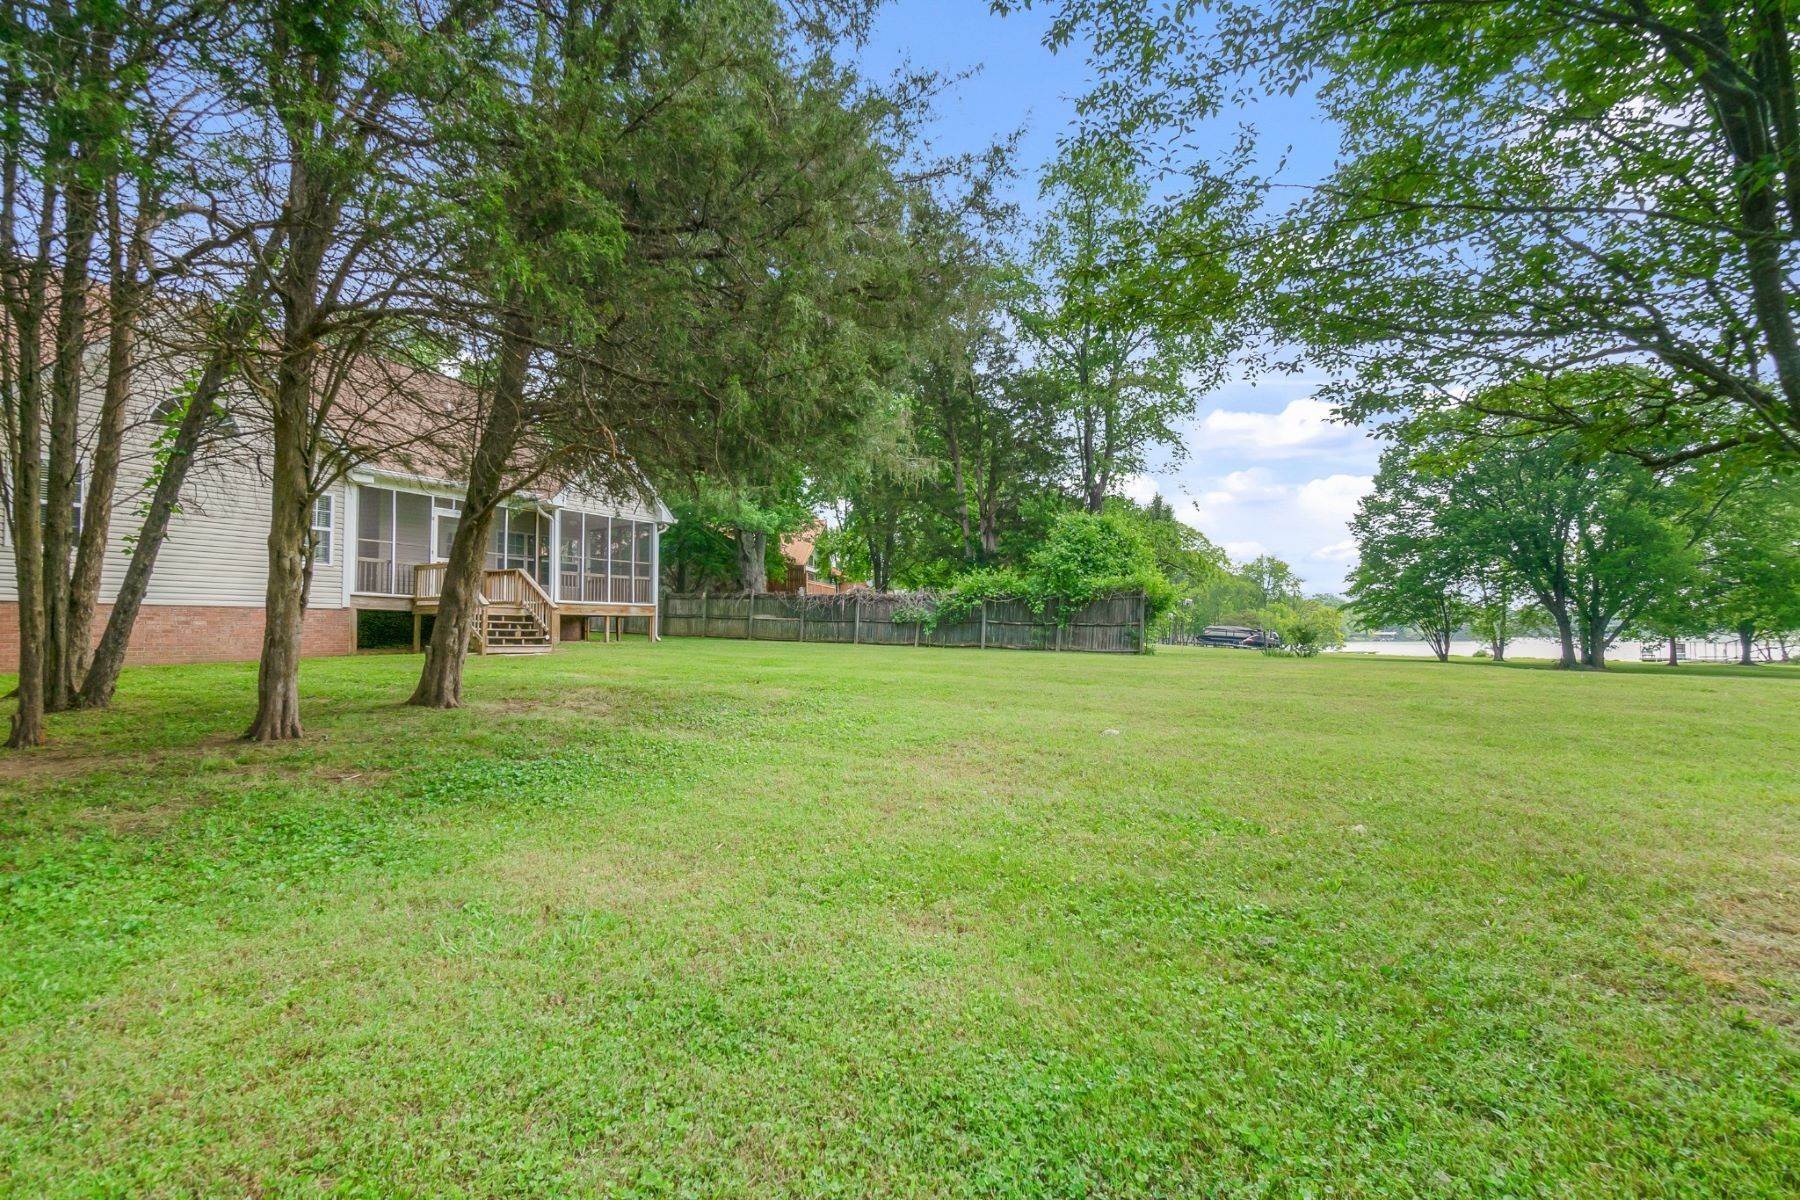 46. Single Family Homes for Sale at 910 Pointview Cir, Mount Juliet, TN, 37122 910 Pointview Cir Mount Juliet, Tennessee 37122 United States